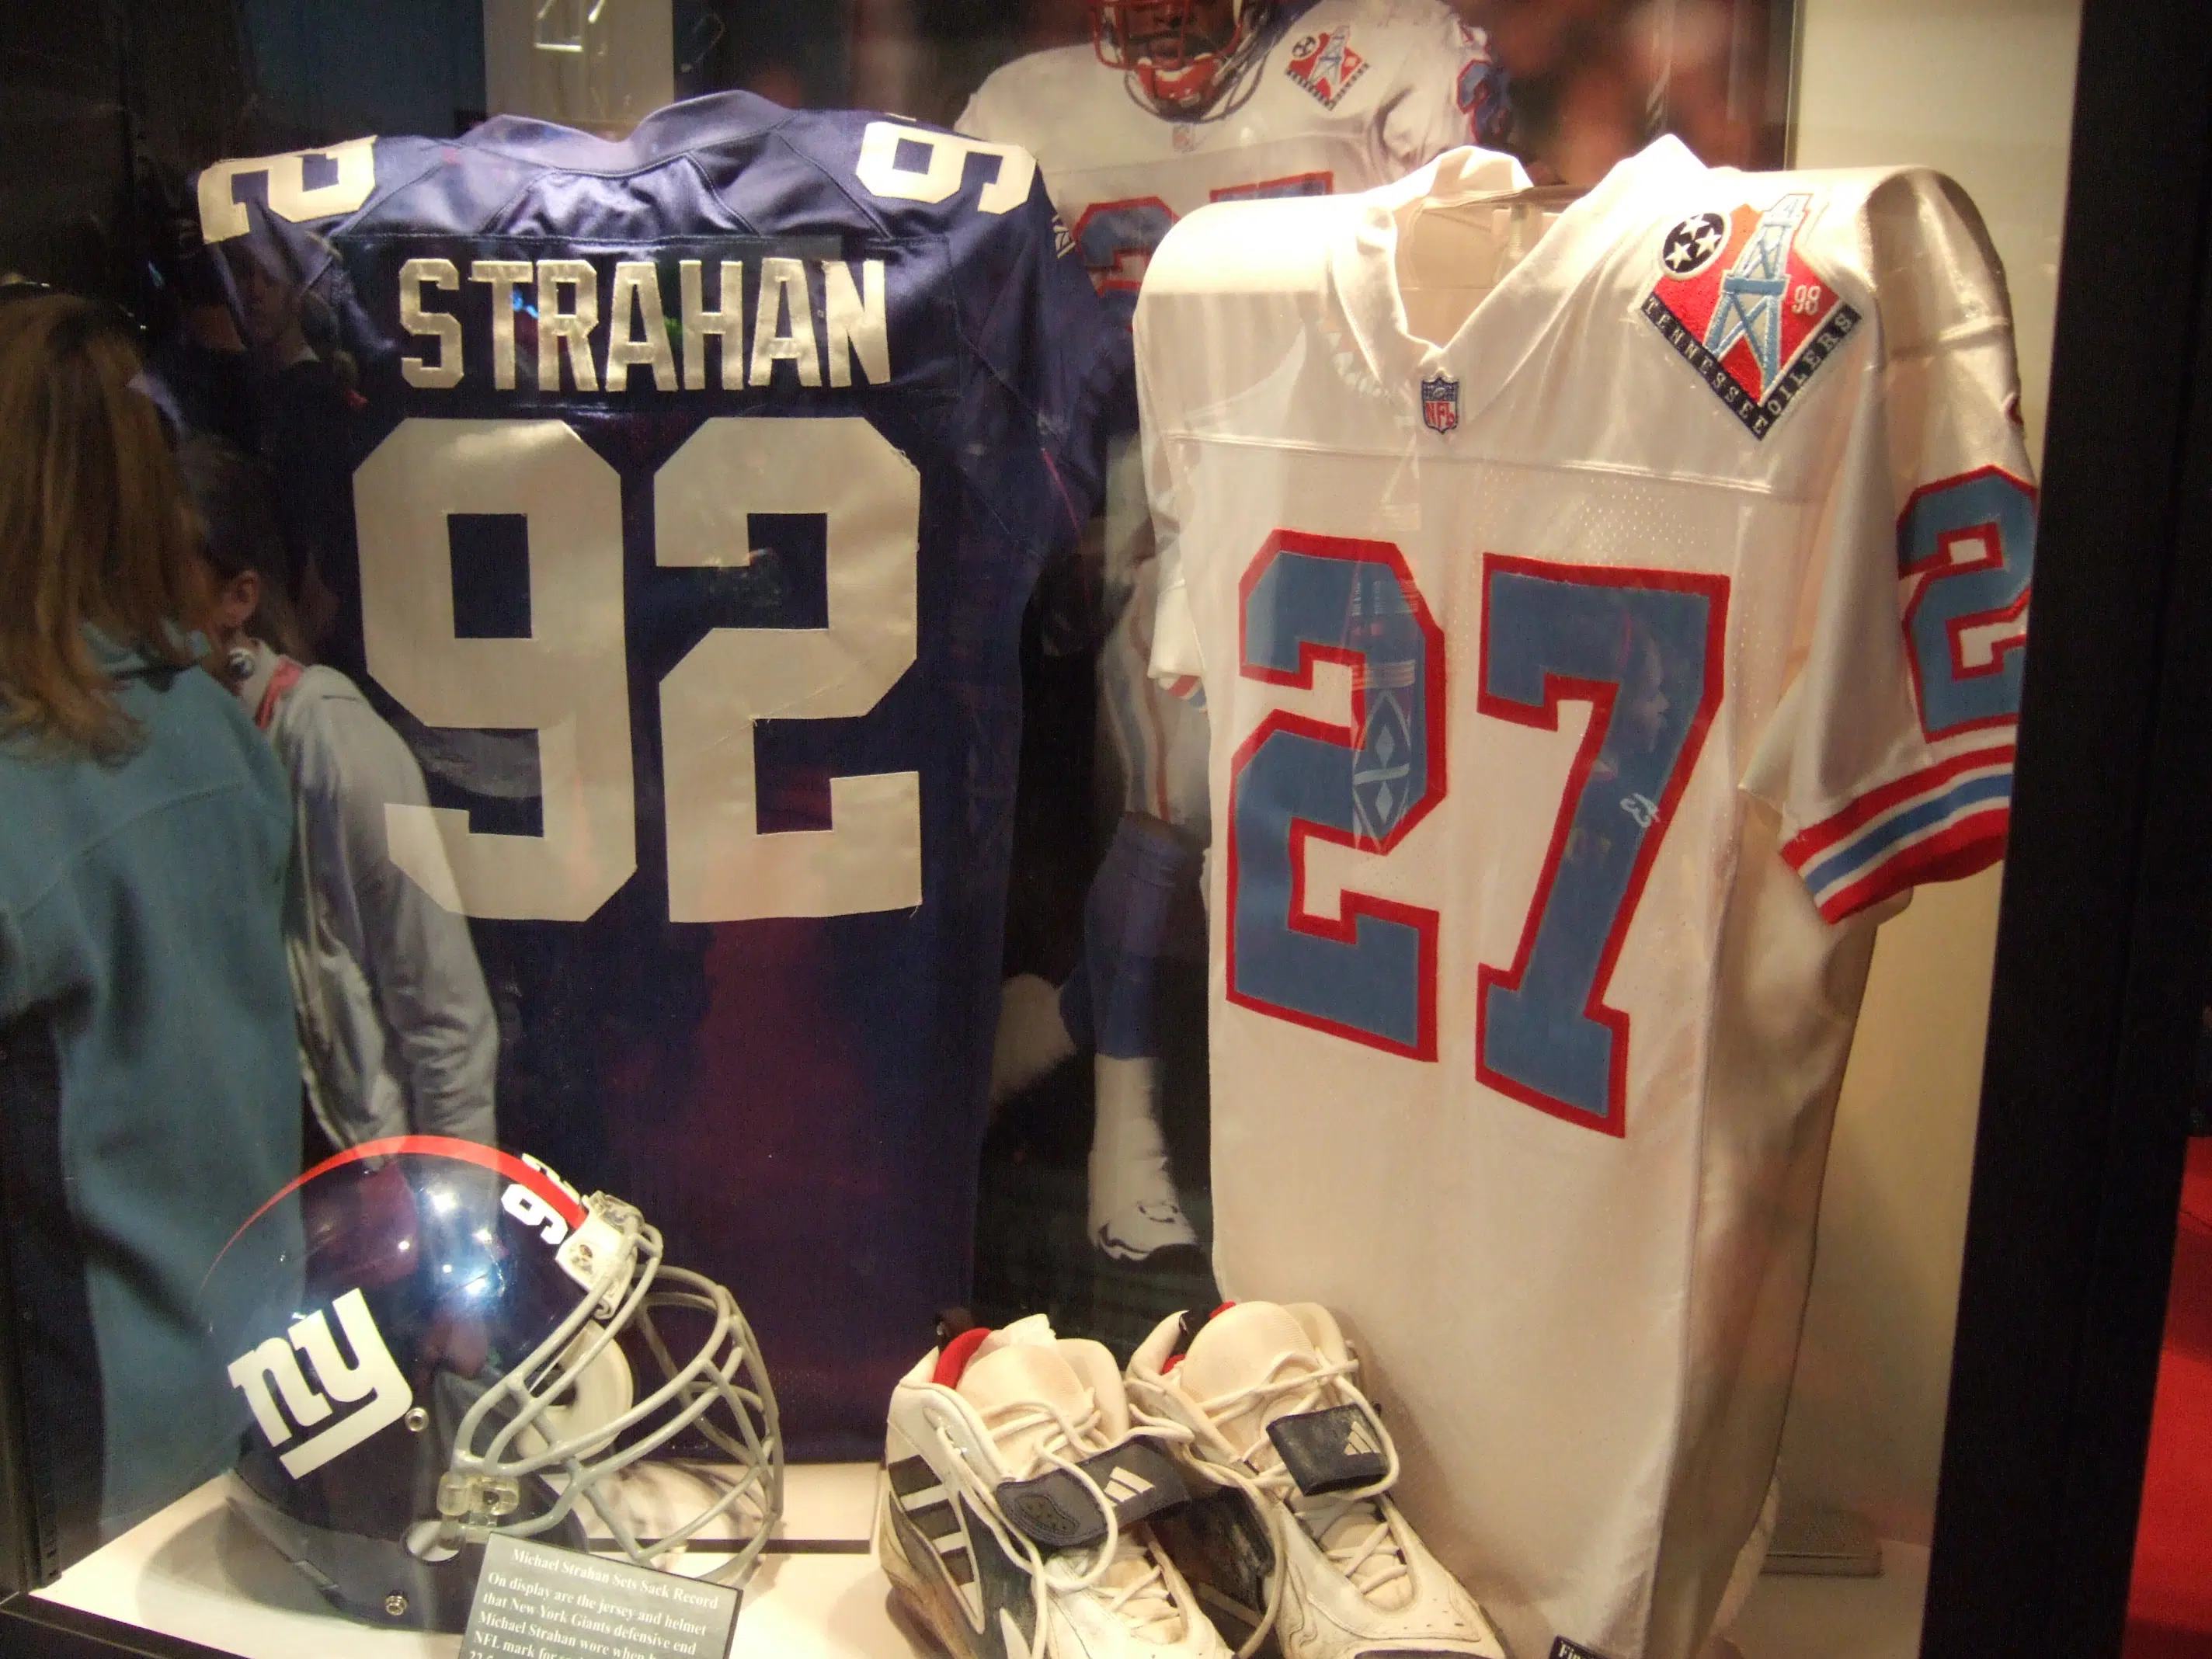 Michael Strahan's No.92 jersey